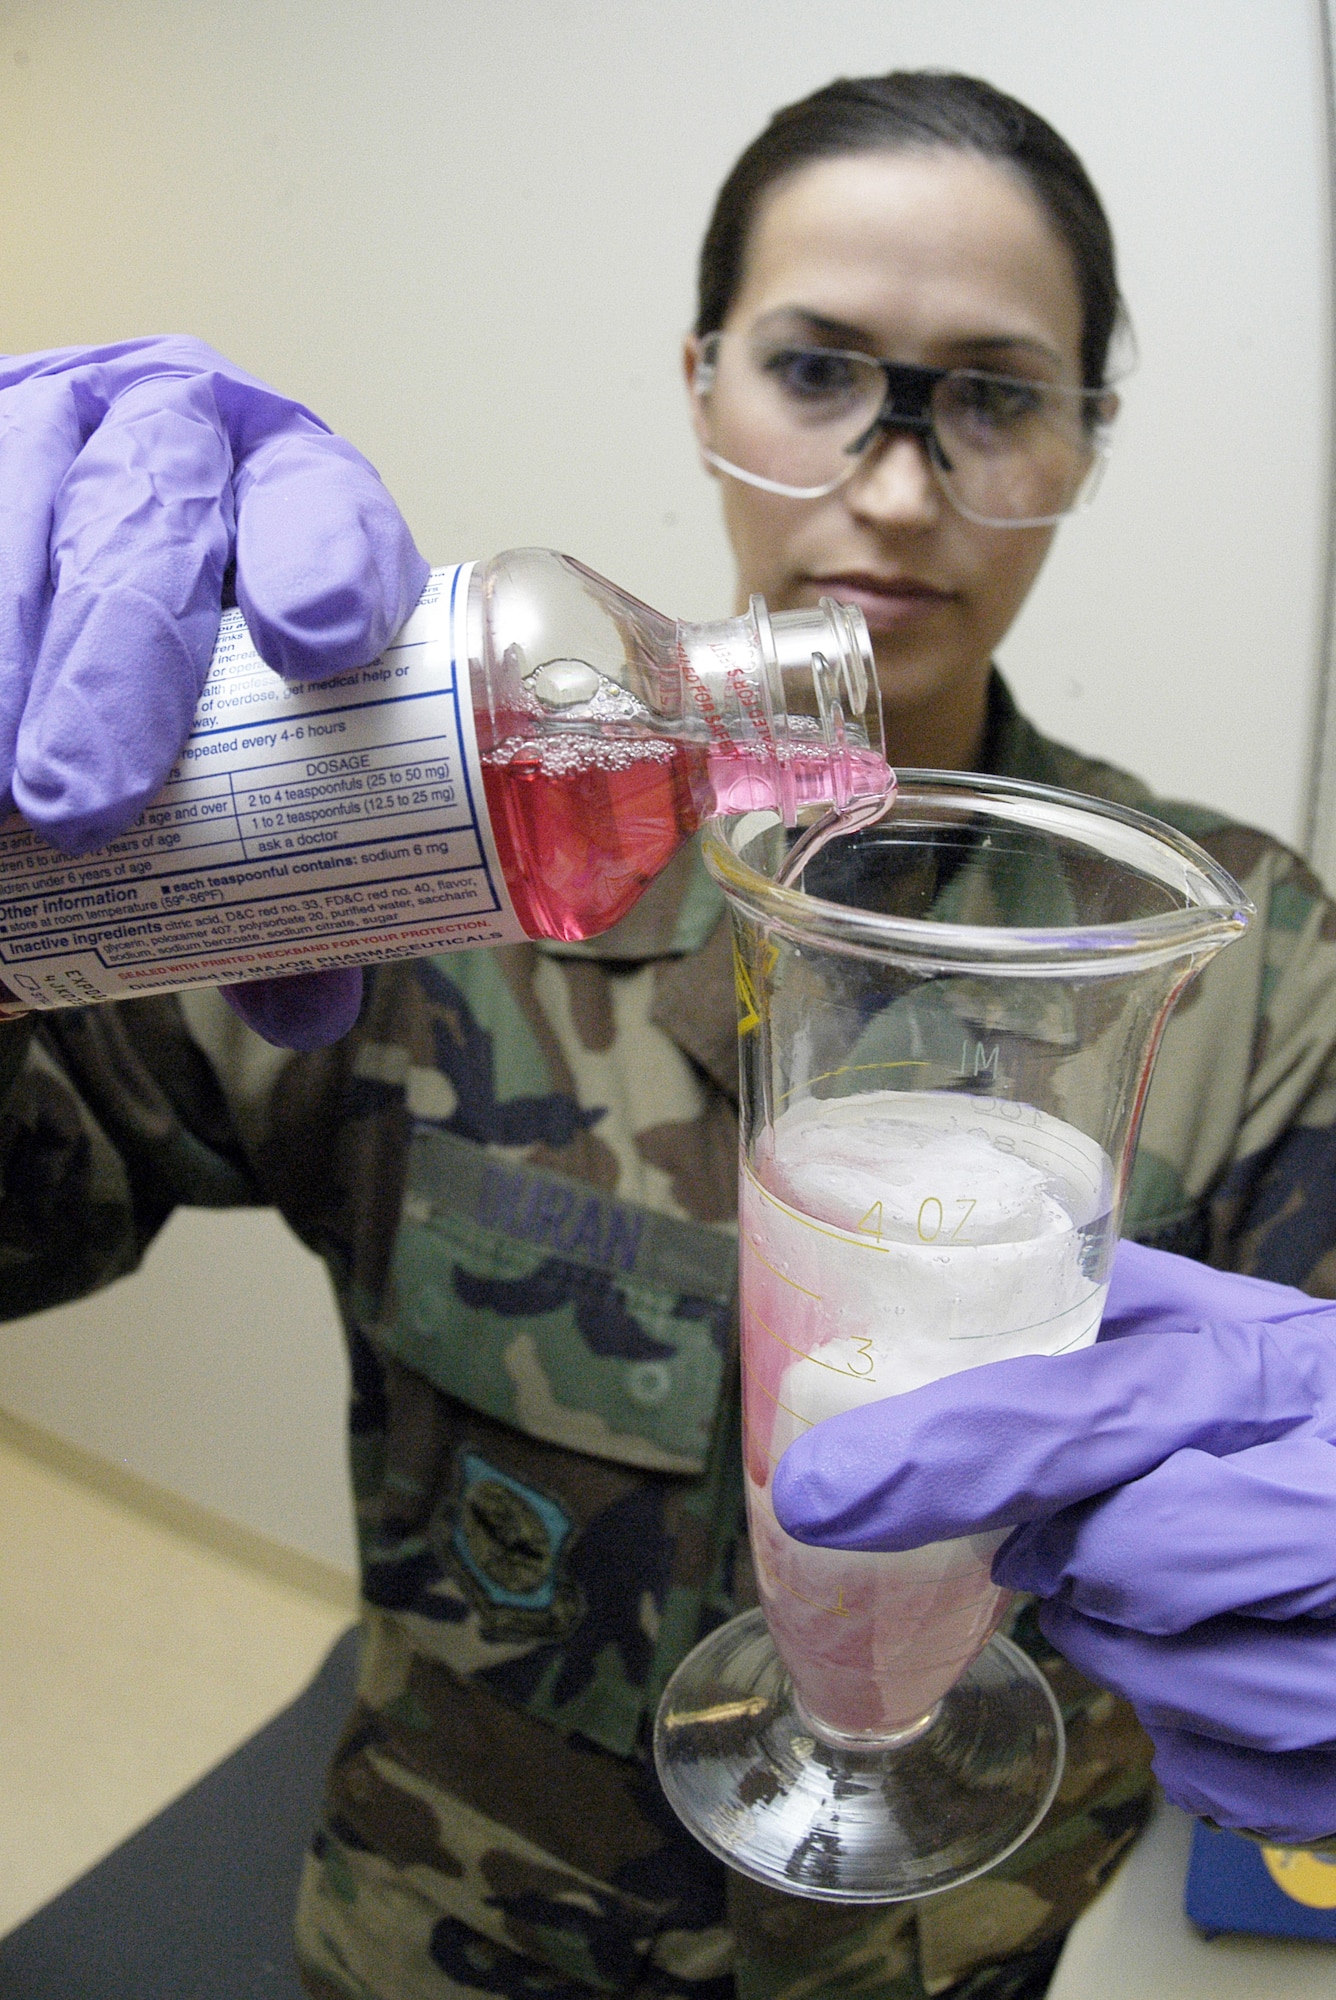 ANDREWS AIR FORCE BASE, Md. (AFPN) -- Senior Airman Mandy Duran mixes a medication compound for a patient. The medication is used to soothe sore throats or cold sores. Although most medications come pre-mixed and packaged, there are some occasions when pharmacists are required to compound medications. Airman Duran is a pharmacy technician with the 89th Medical Support Squadron. (U.S. Air Force photo by Bobby Jones)